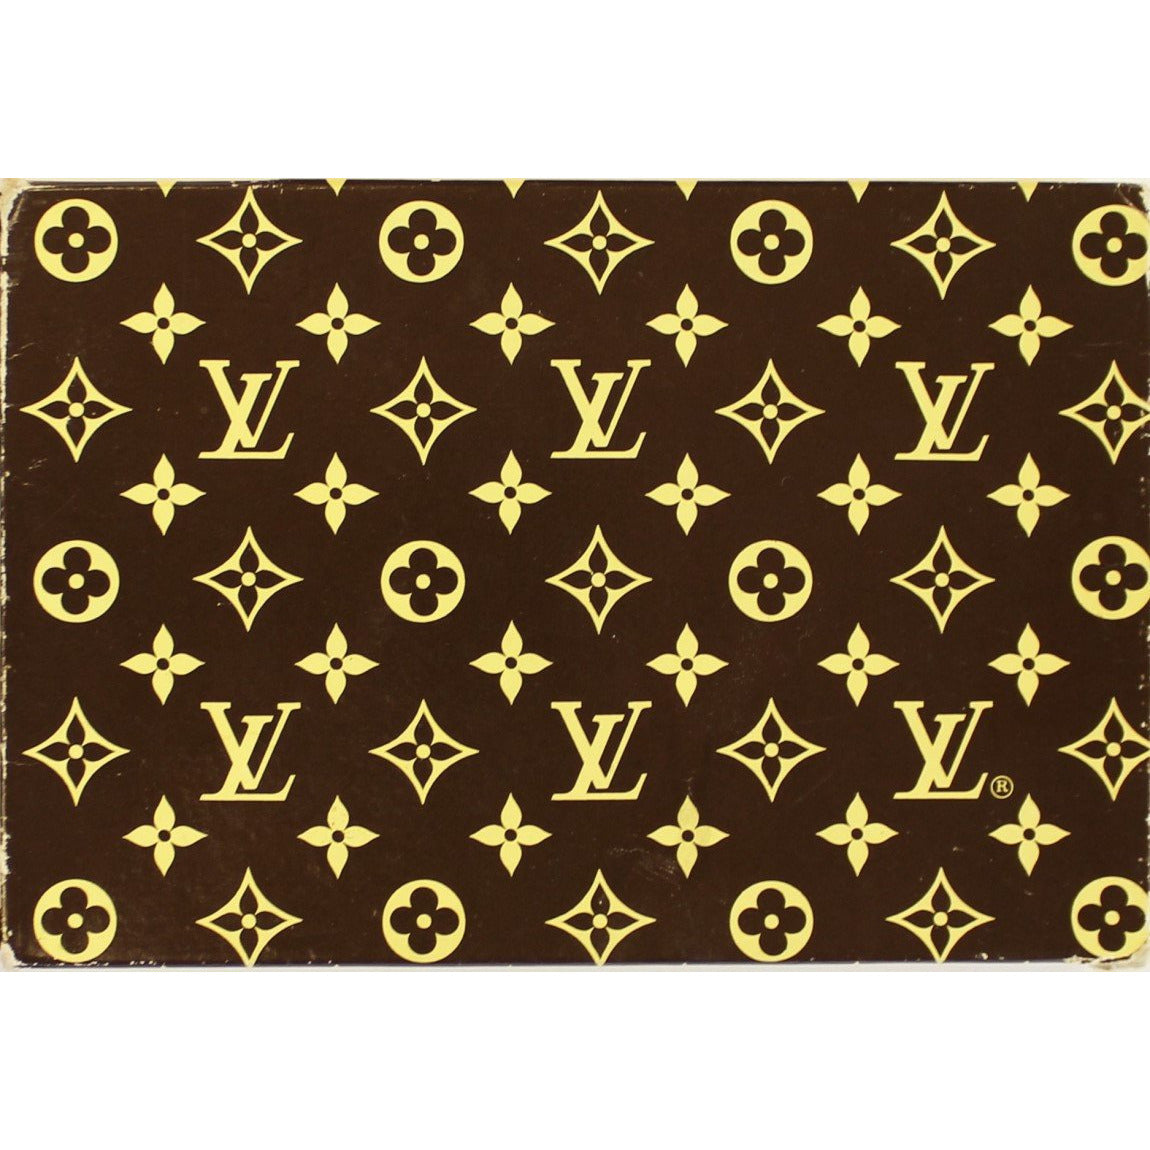 Louis Vuitton playing cards  Deck of cards, Playing cards, Louis vuitton